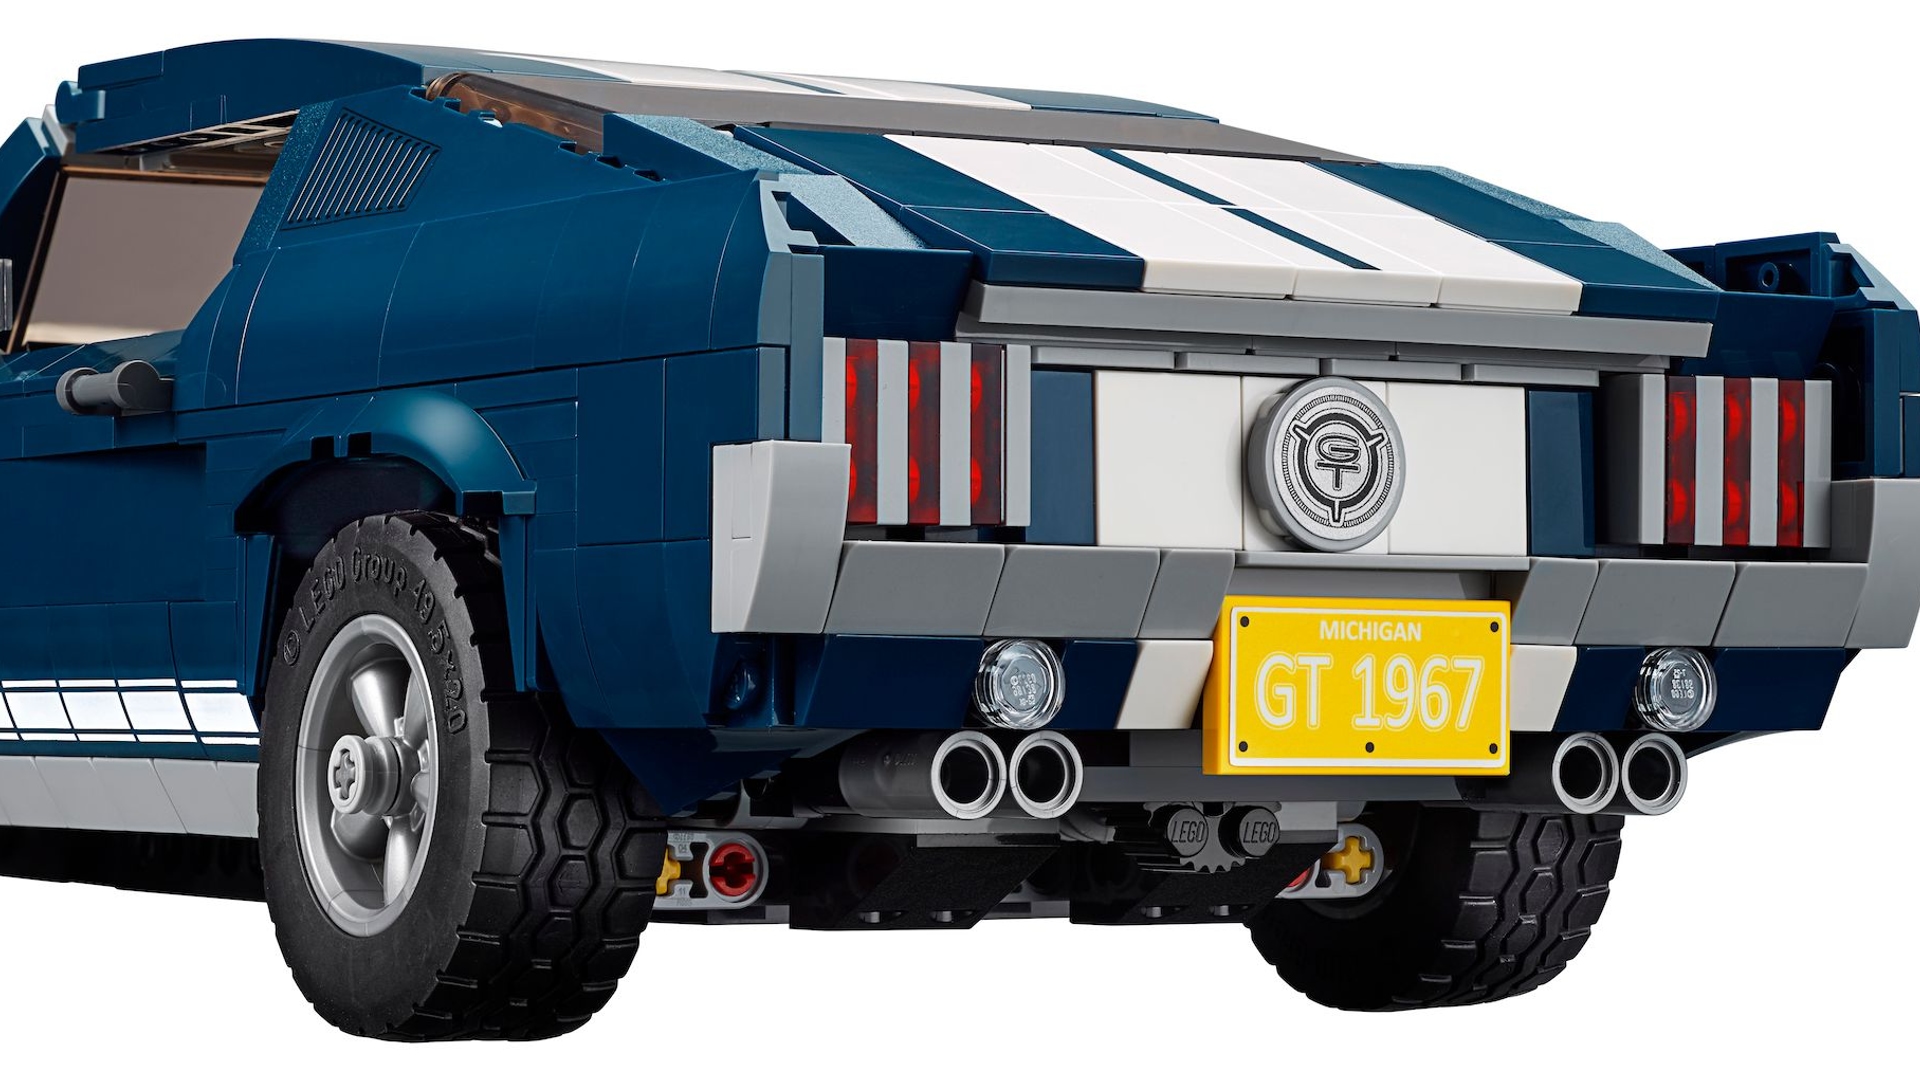 1967 Ford Mustang Lego kit